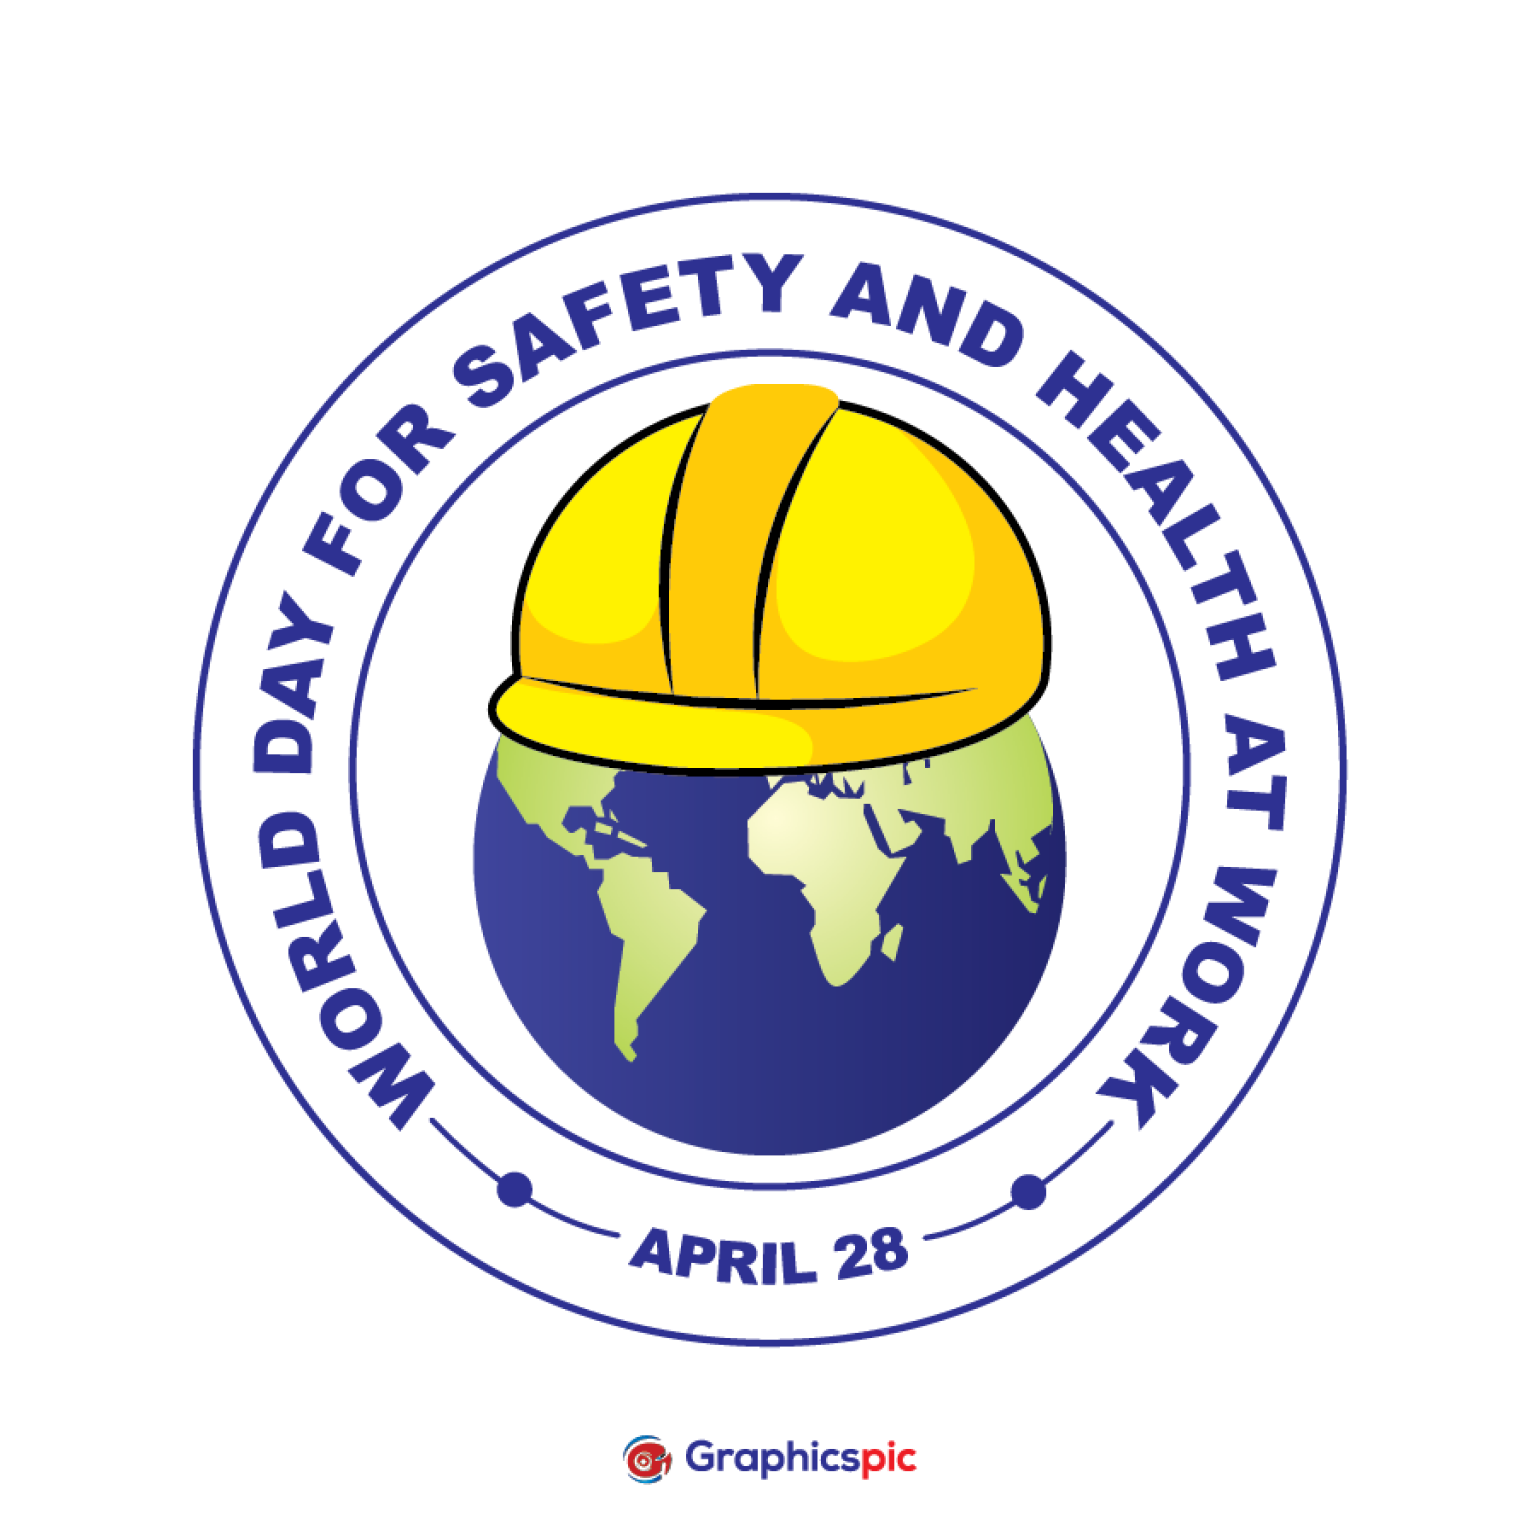 World day for safety and health at work icon with glob & helmet